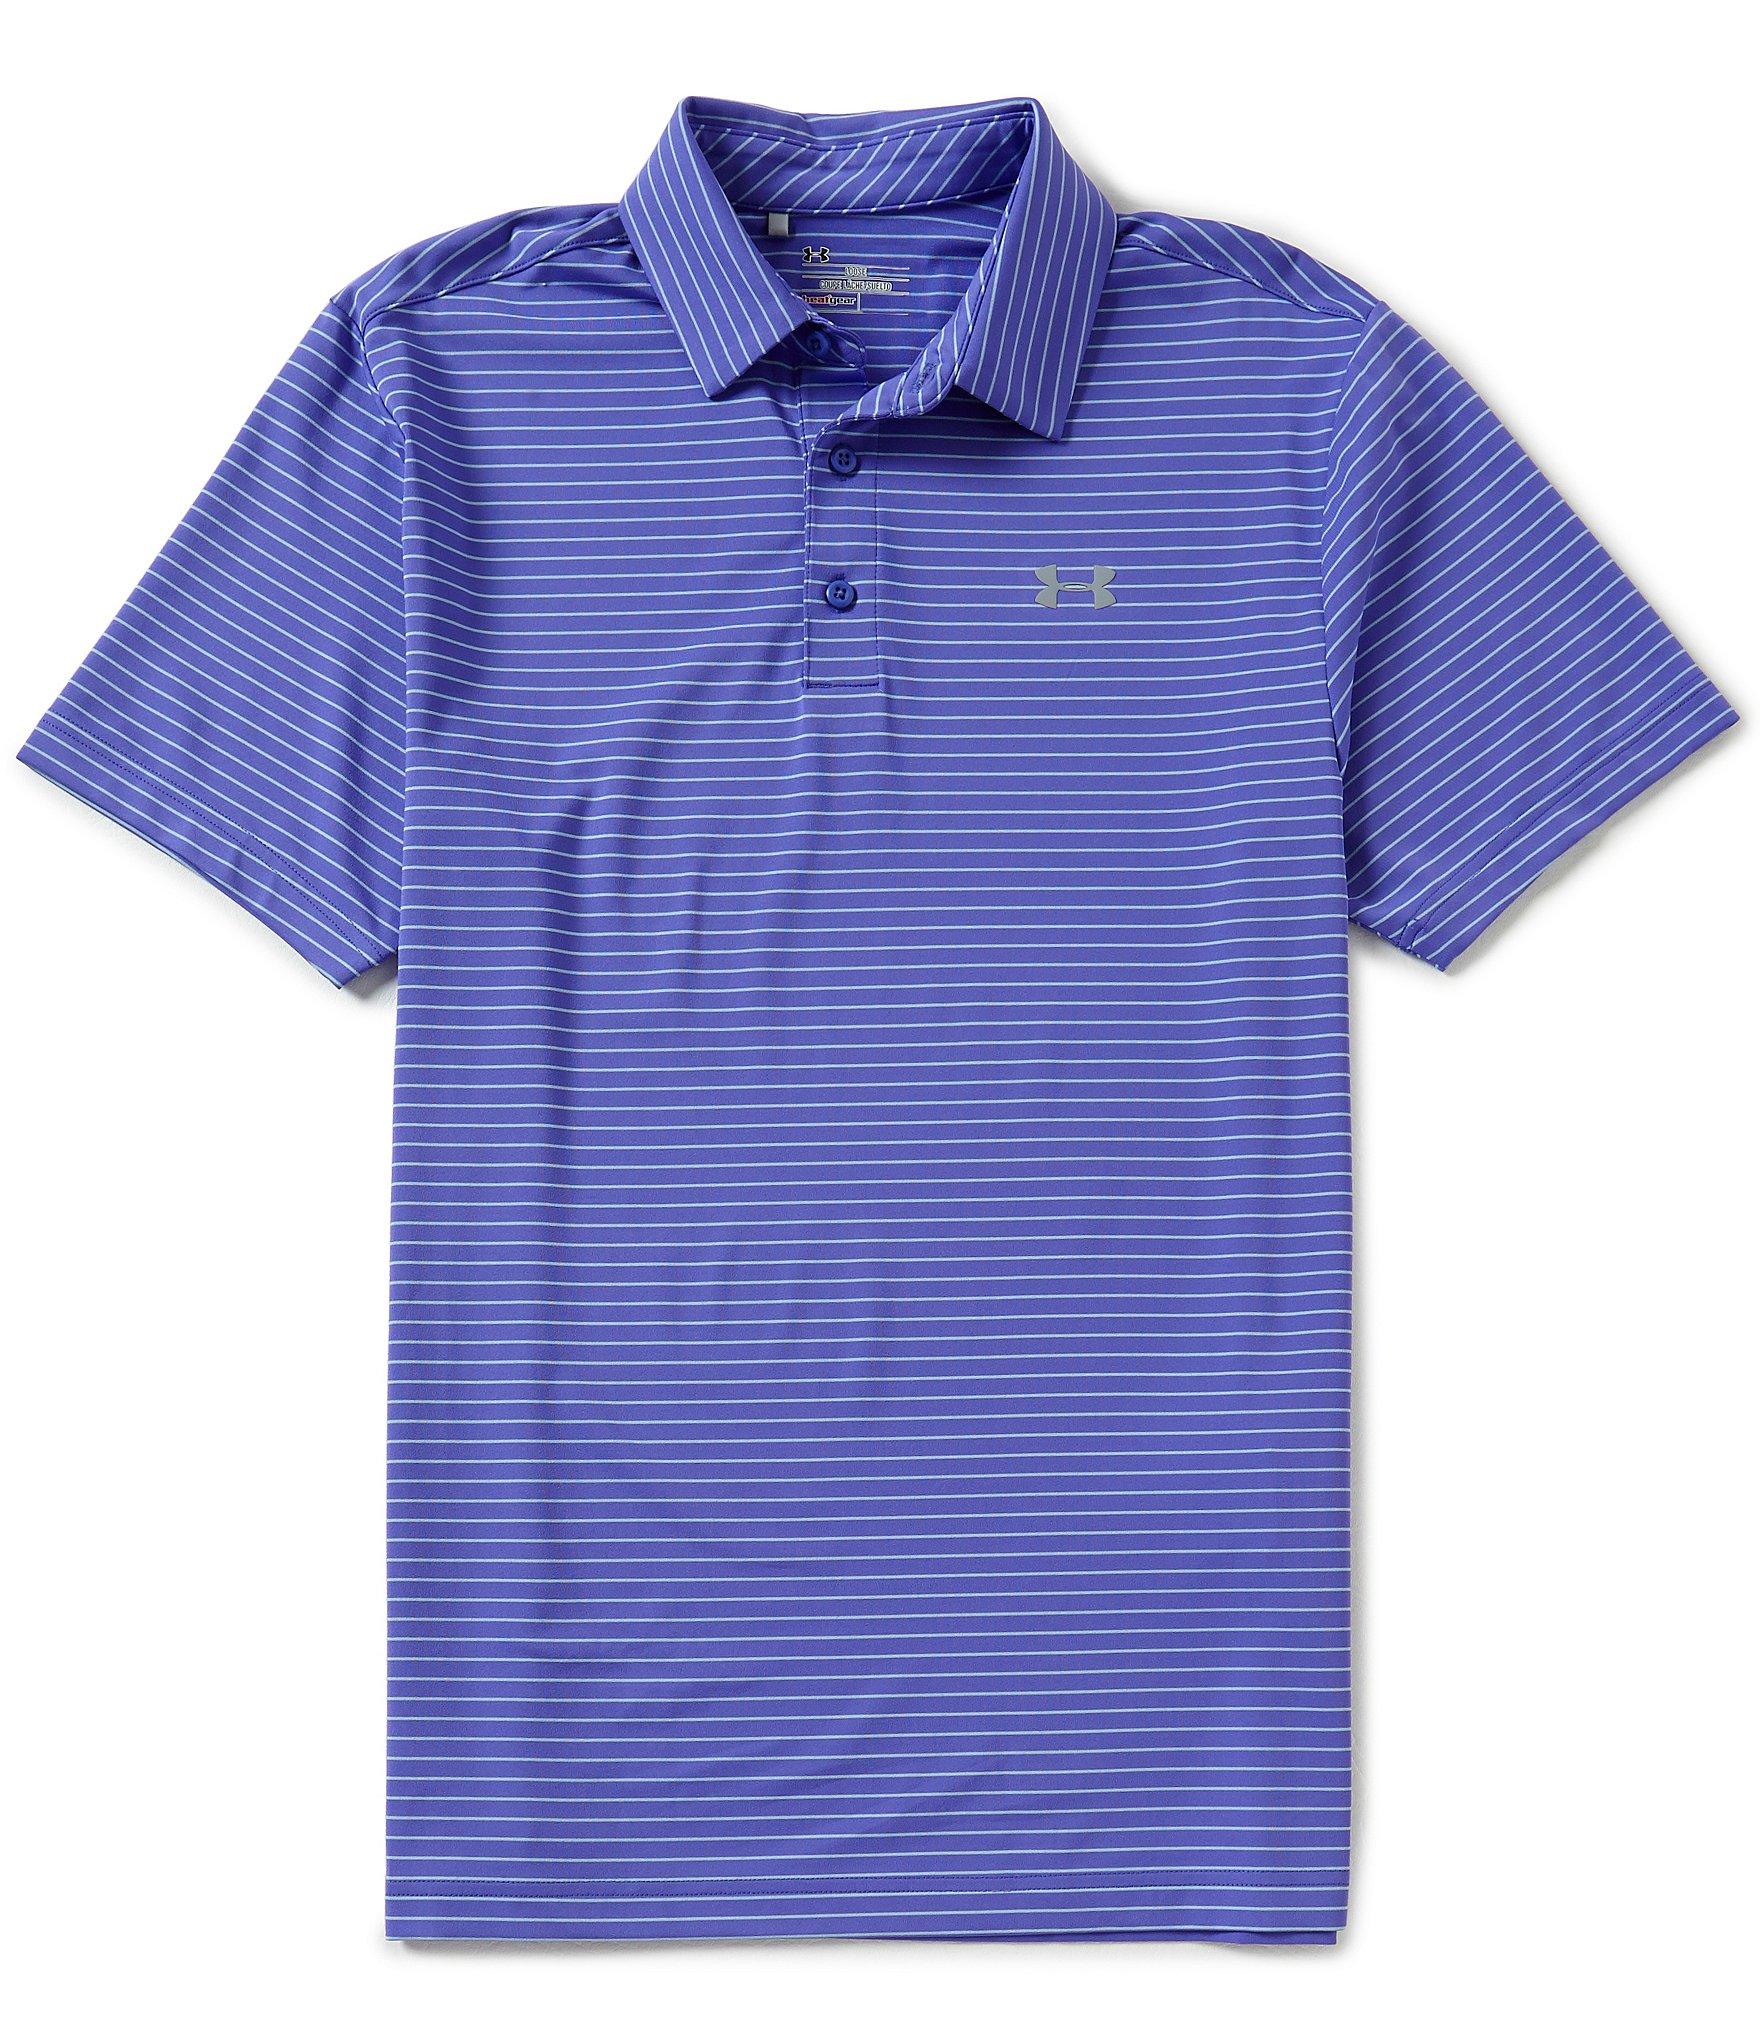 Lyst - Under Armour Golf Horizontal Striped Playoff Polo Shirt in ...